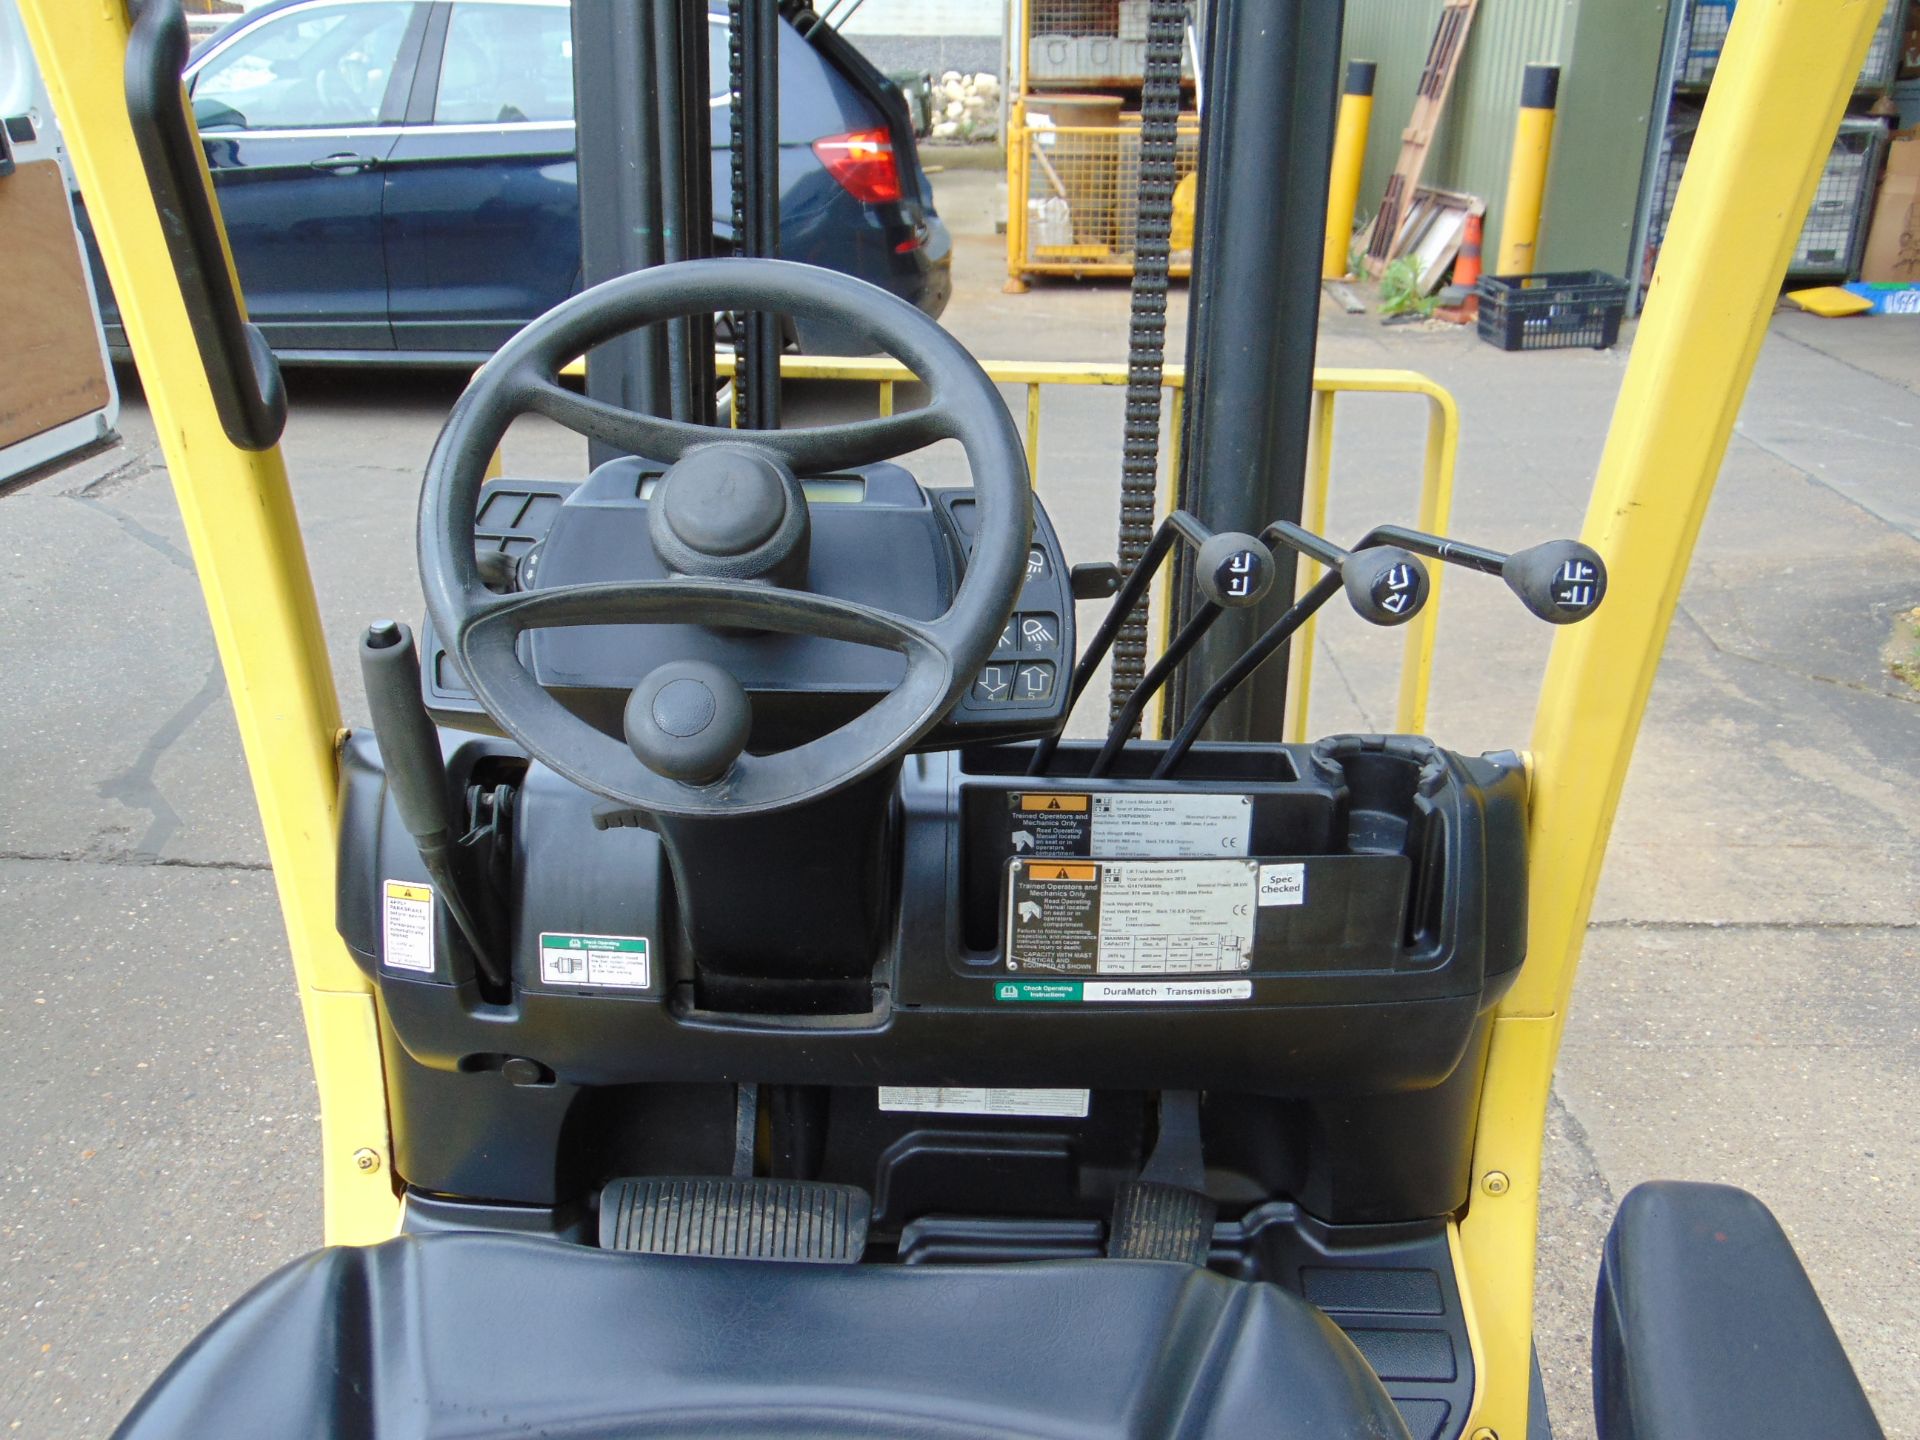 2015 Hyster S3.0FT - LPG / Gas Fork Lift Truck - Image 24 of 50